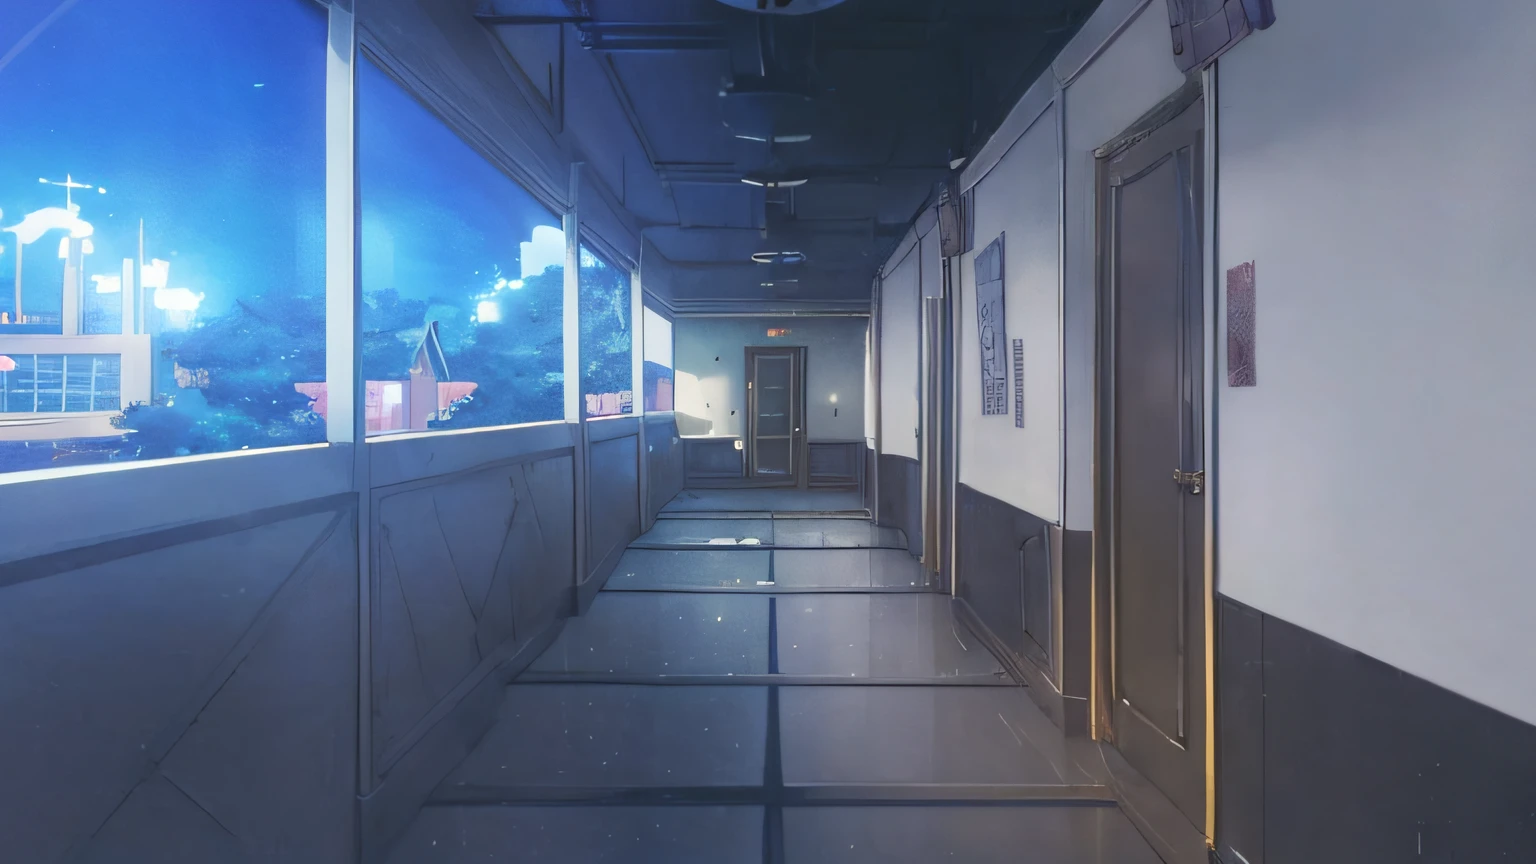 there is a long hallway with a clock on the wall, hallway landscape, anime background art, anime background, anime set style, anime movie background, anime scenery concept art, infinite hallway, realistic anime 3 d style, interior background art, anime scenery, corridor, style of makoto shinkai, va-11 hall-a, style of madhouse studio anime